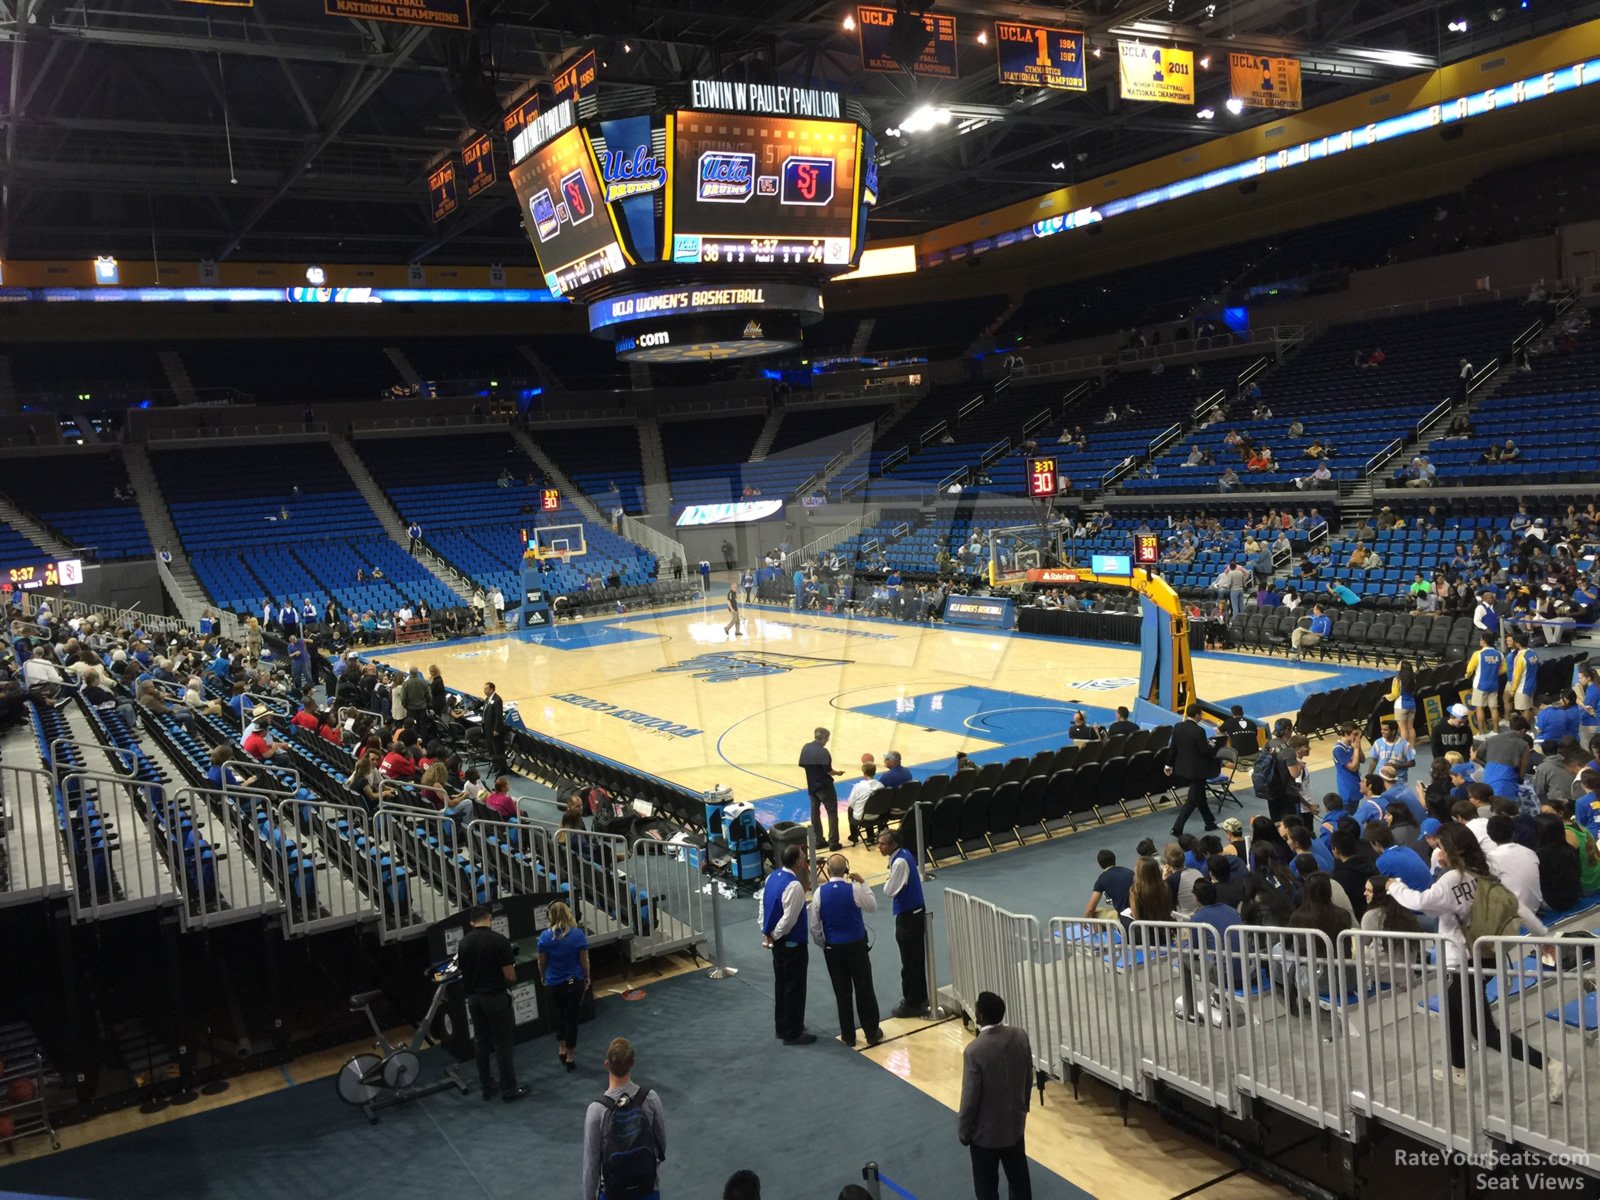 section 124, row 3 seat view  - pauley pavilion